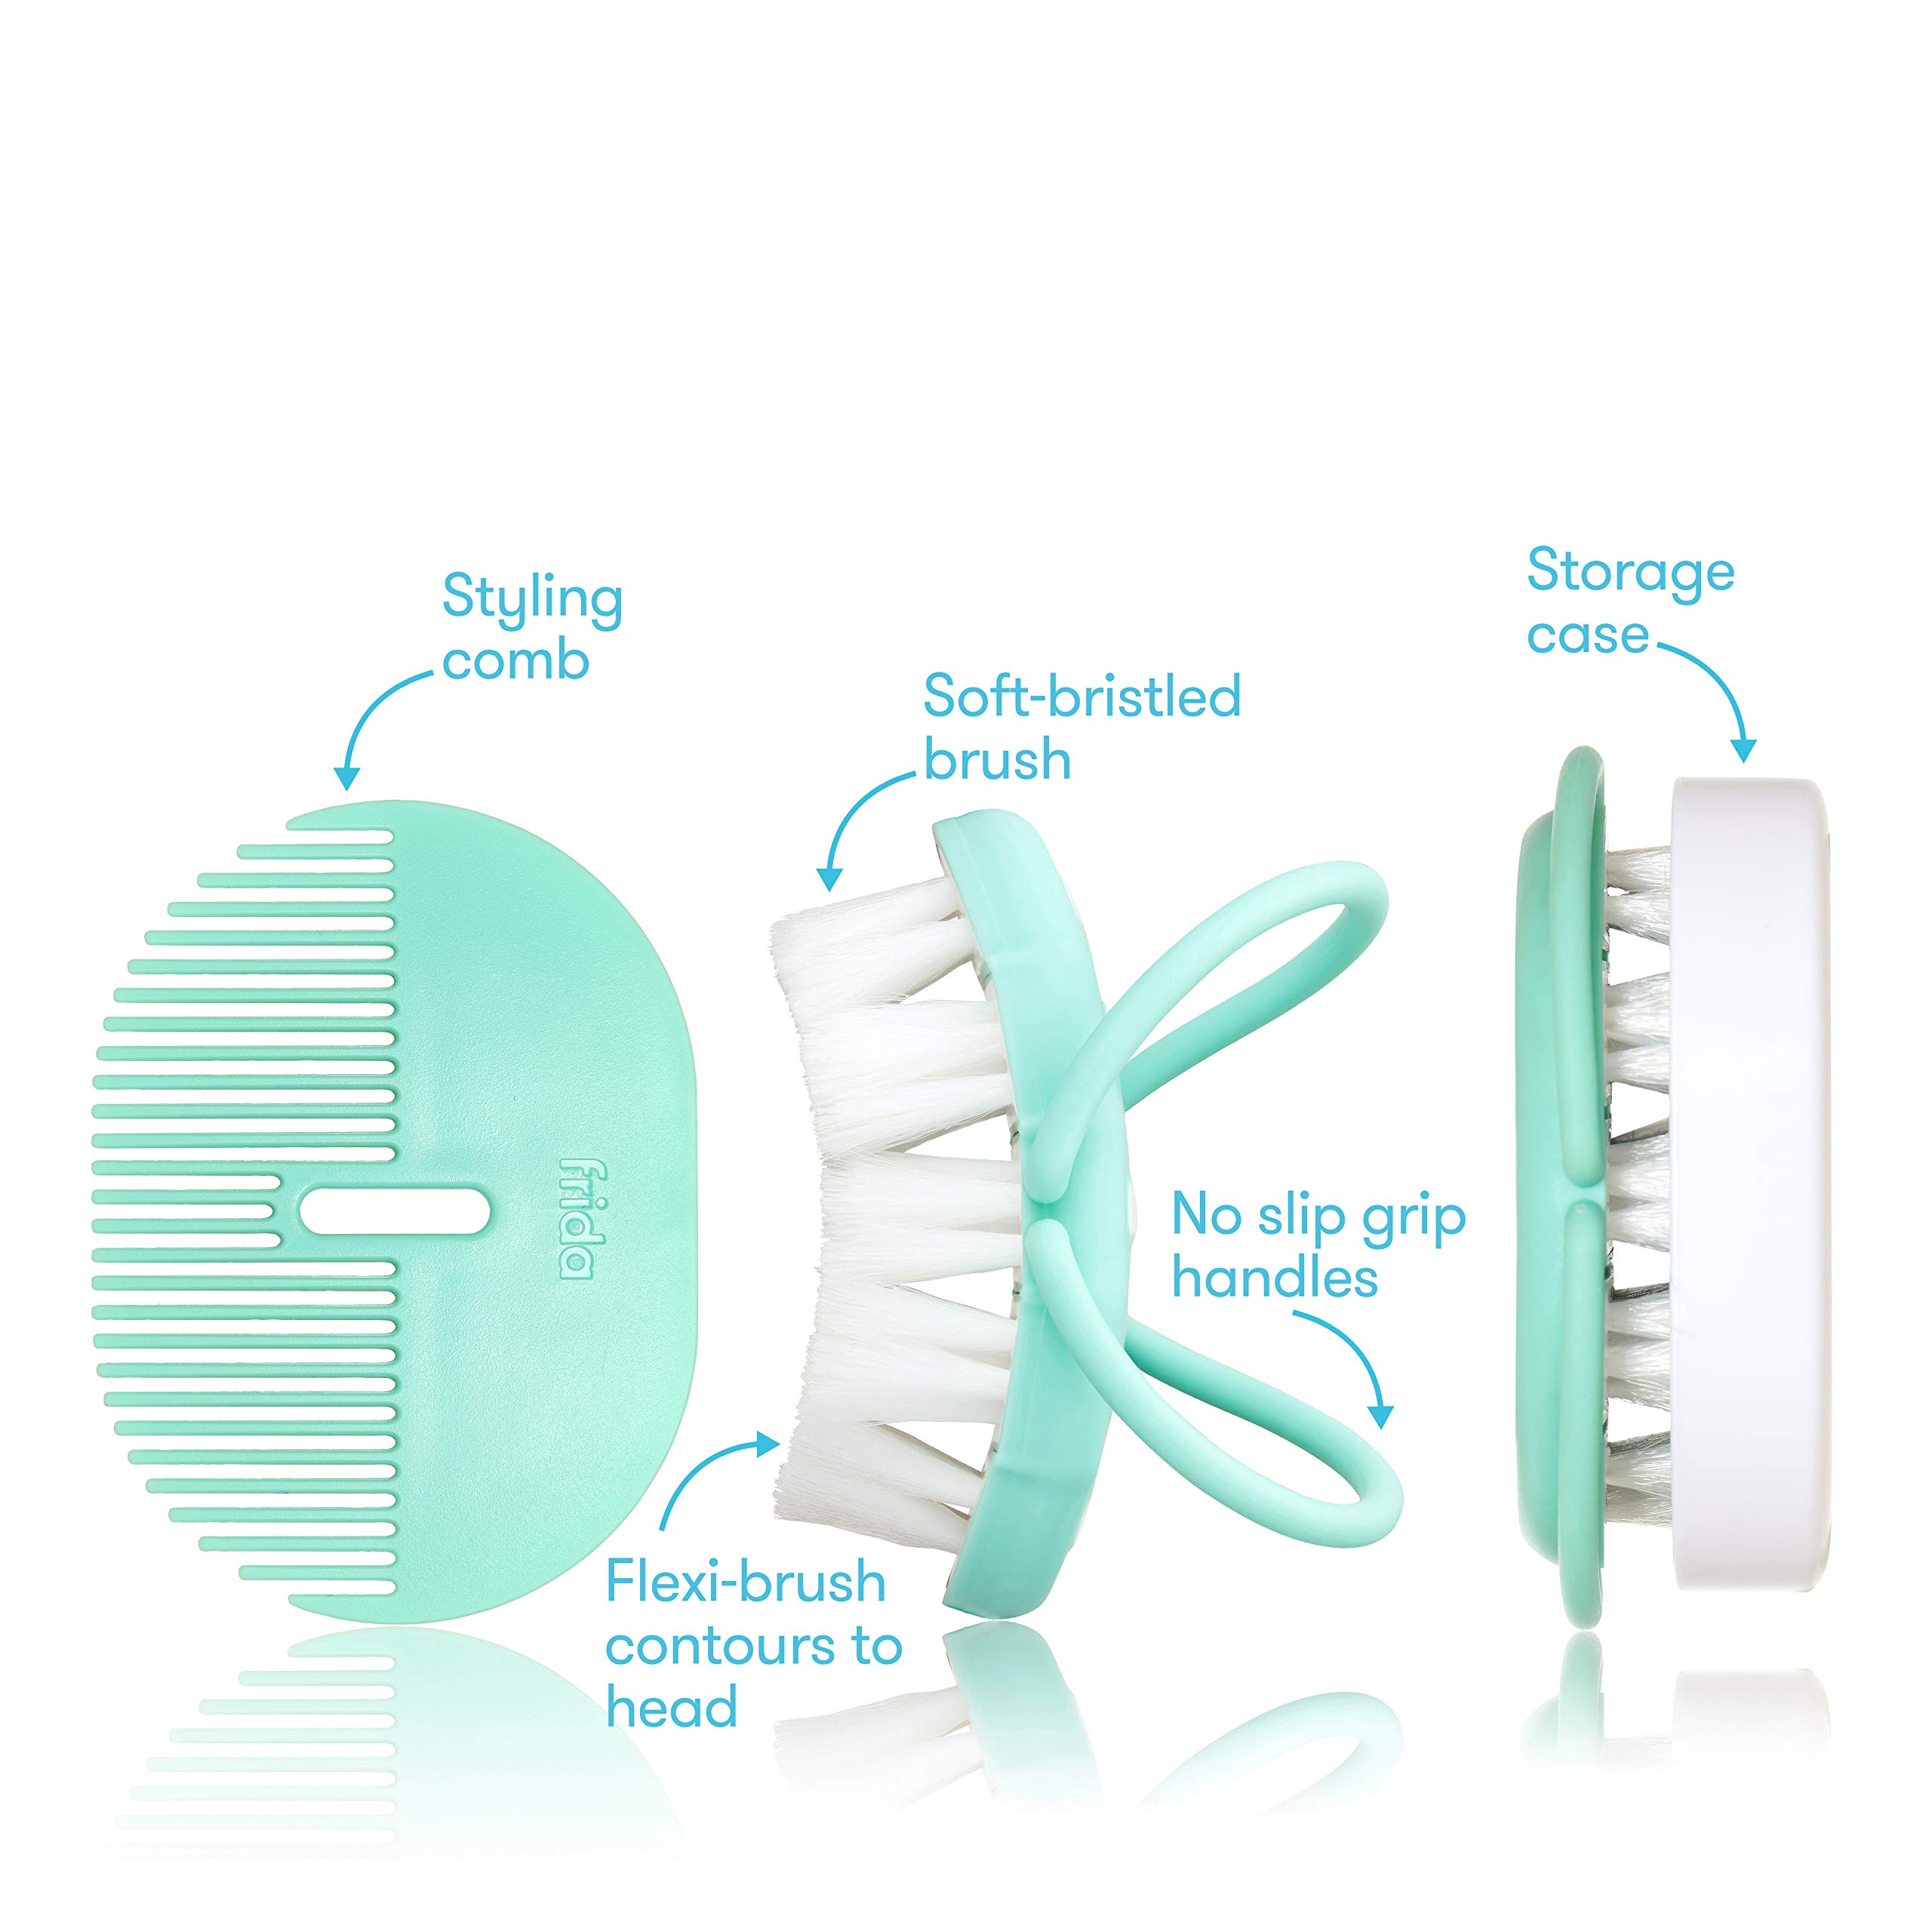 Frida Baby Infant Head-Hugging Hairbrush + Styling Comb Set, from The Makers of NoseFrida